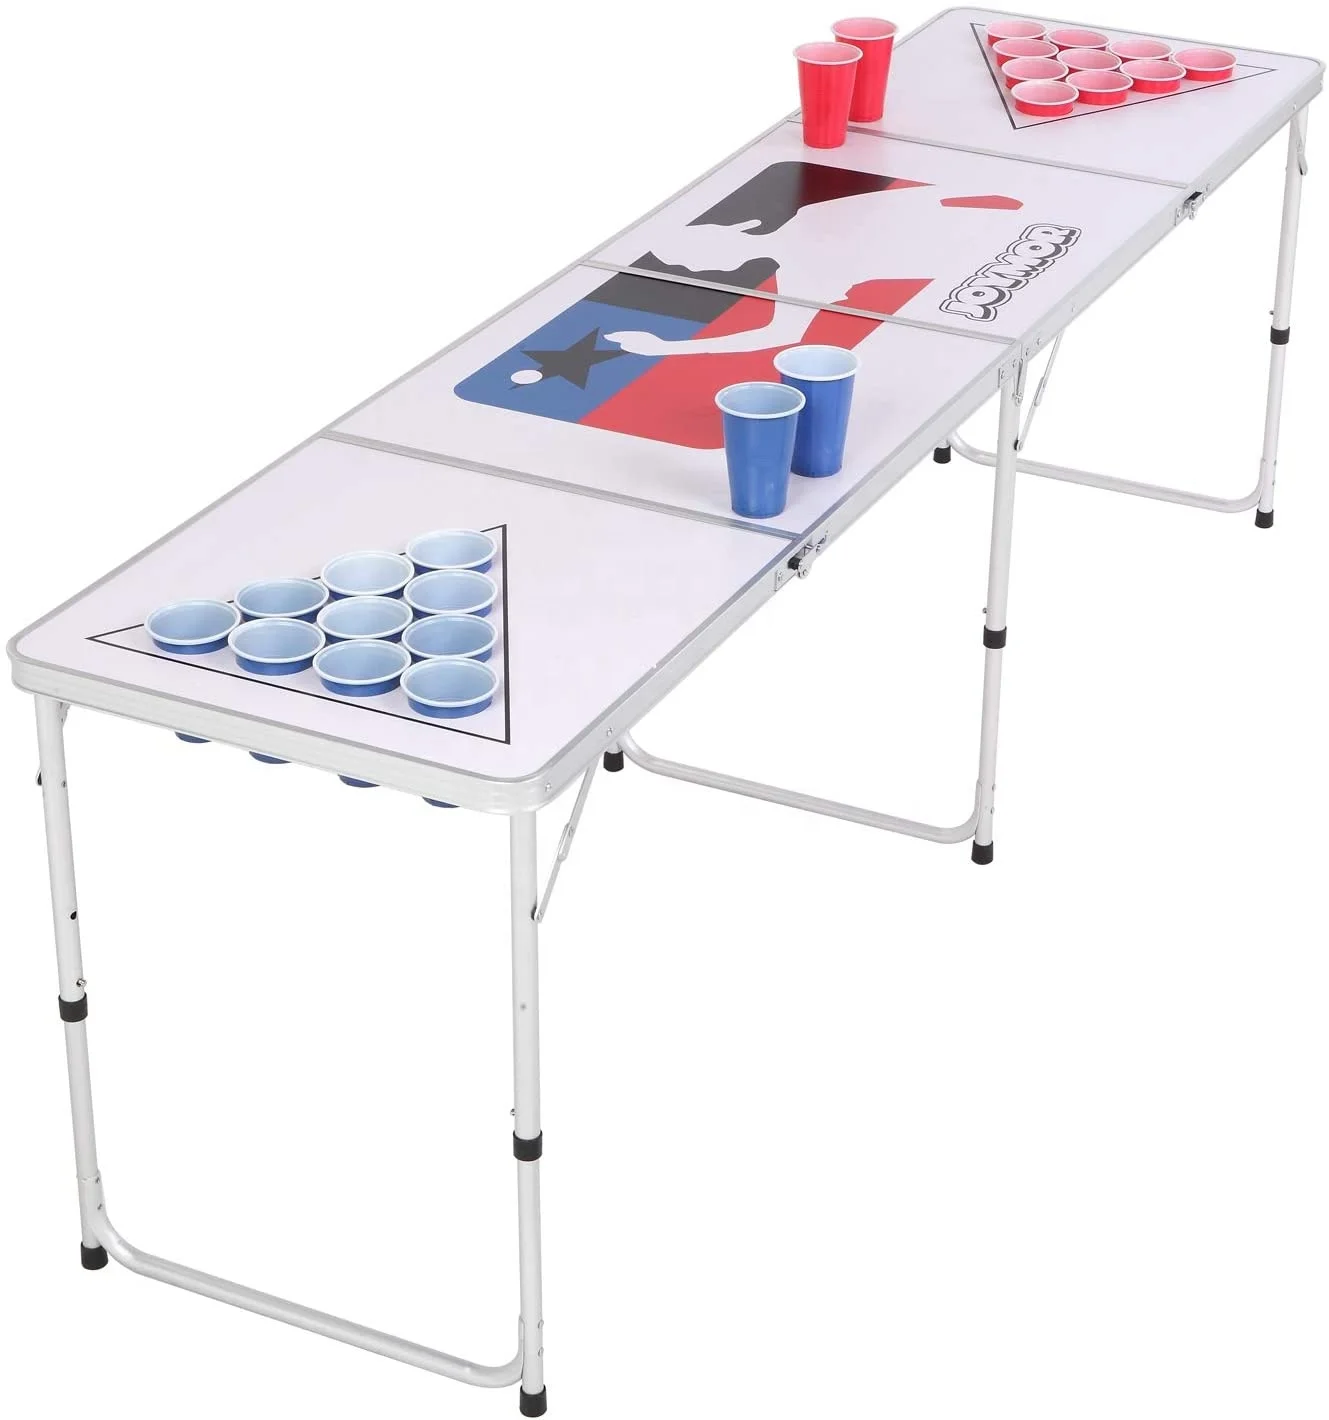 Foldable beerpong table 8 feet portable folding led beer pong table with cup holes (1600302253205)